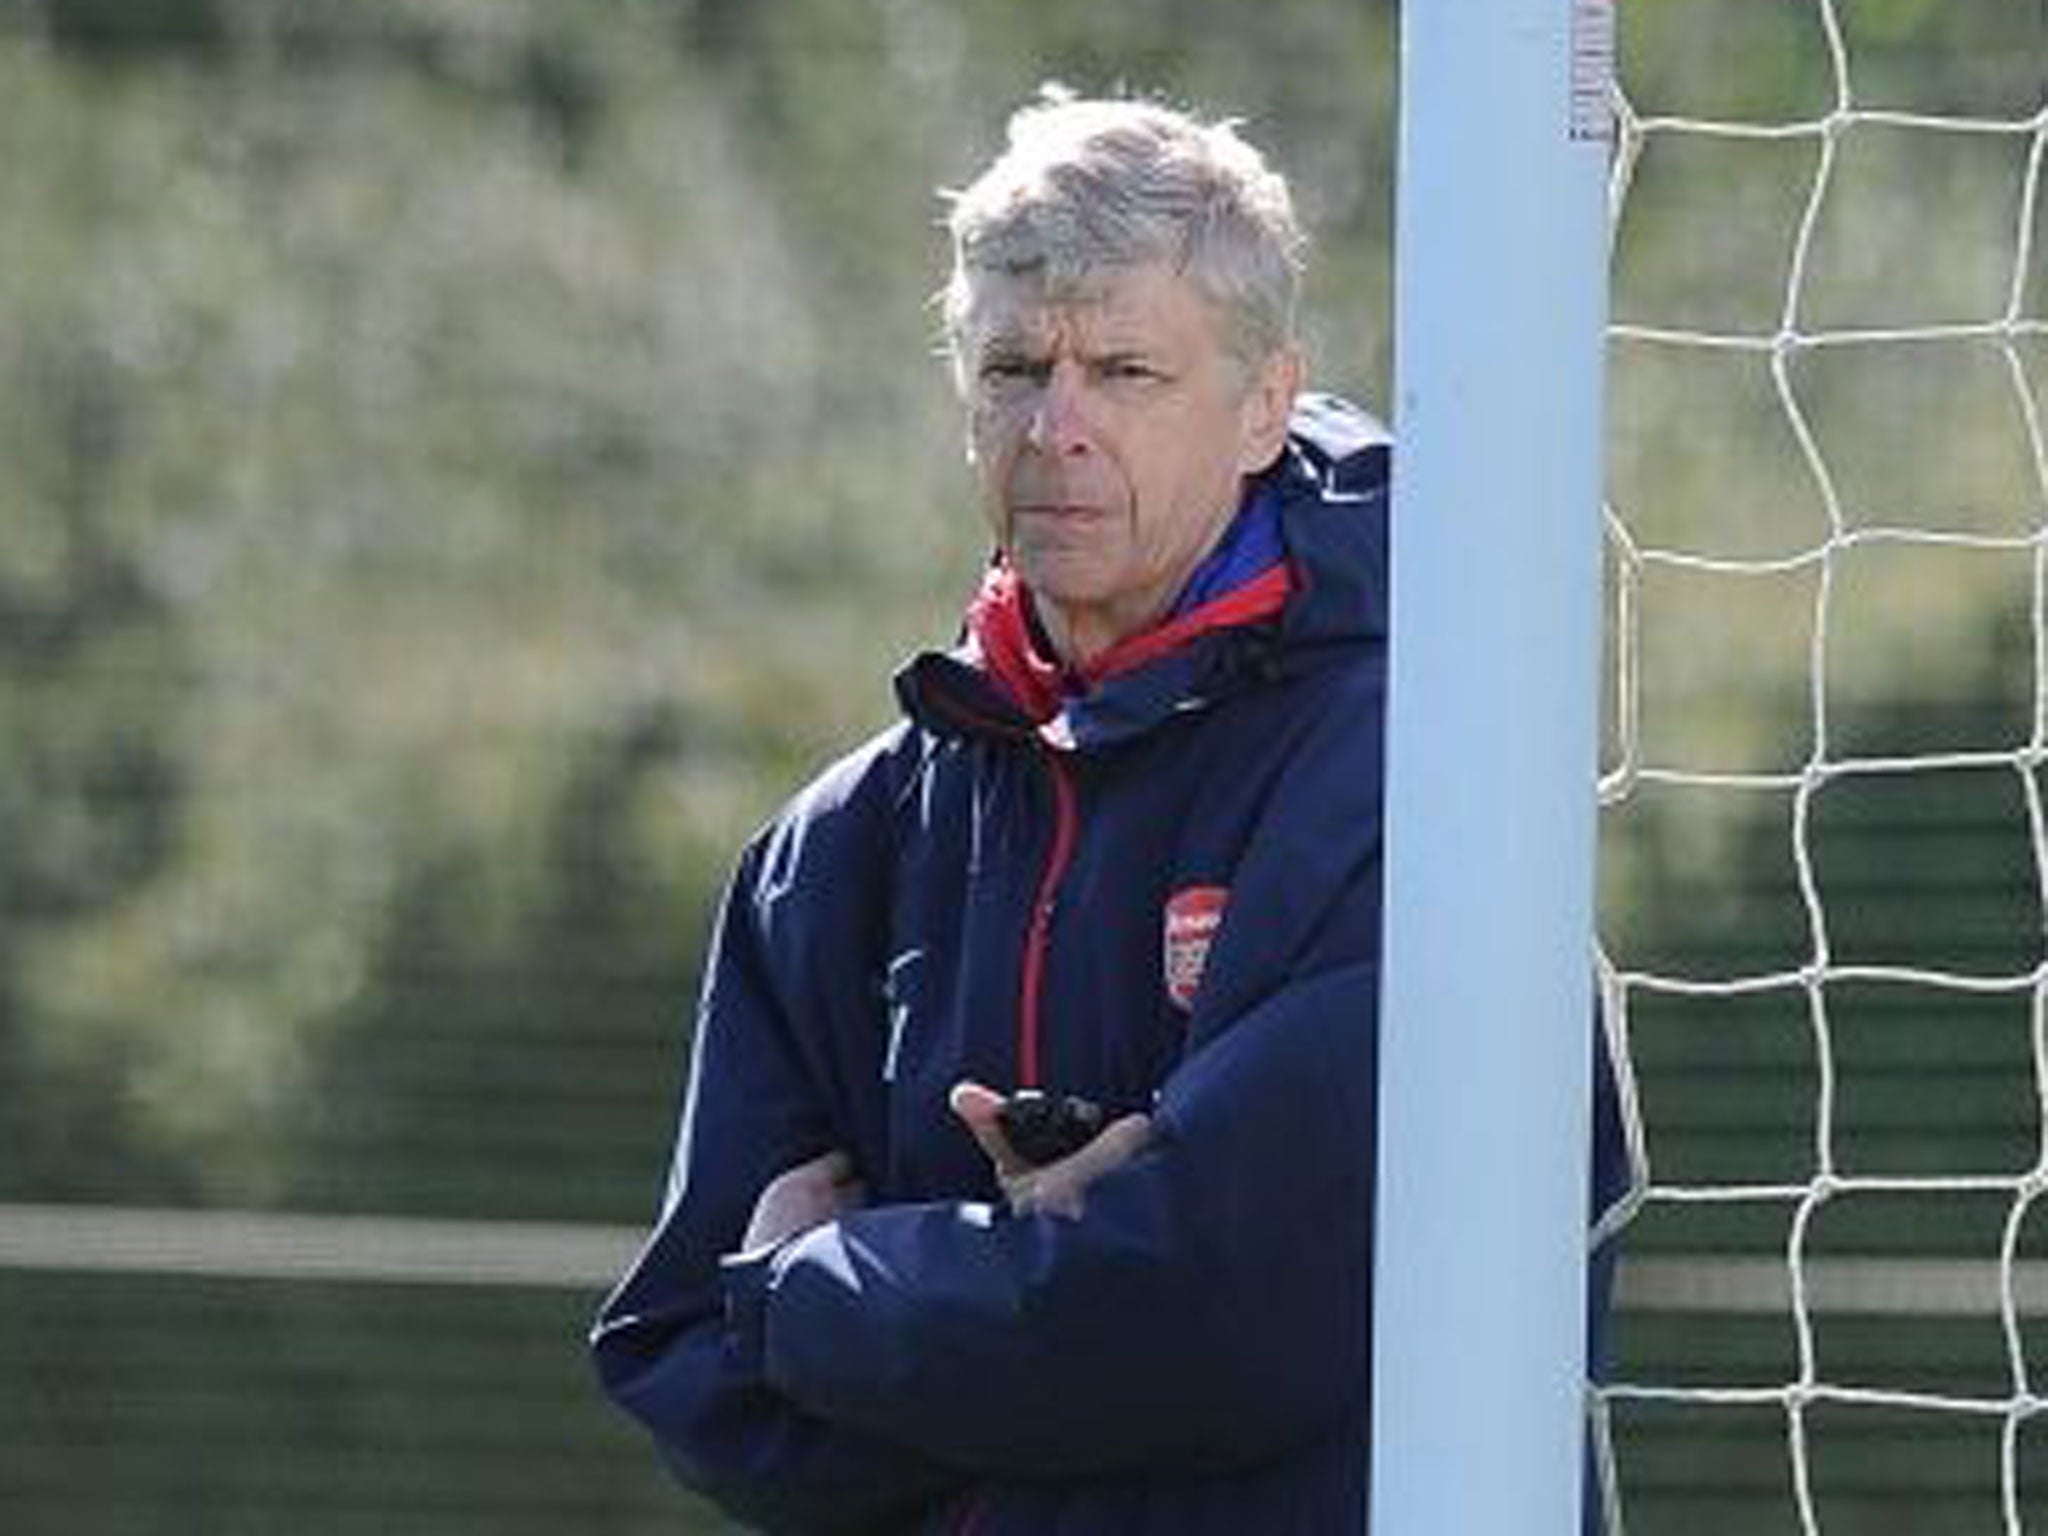 Arsène Wenger has urged his team not to let the 6-0 defeat at Chelsea derail what has been a good season so far